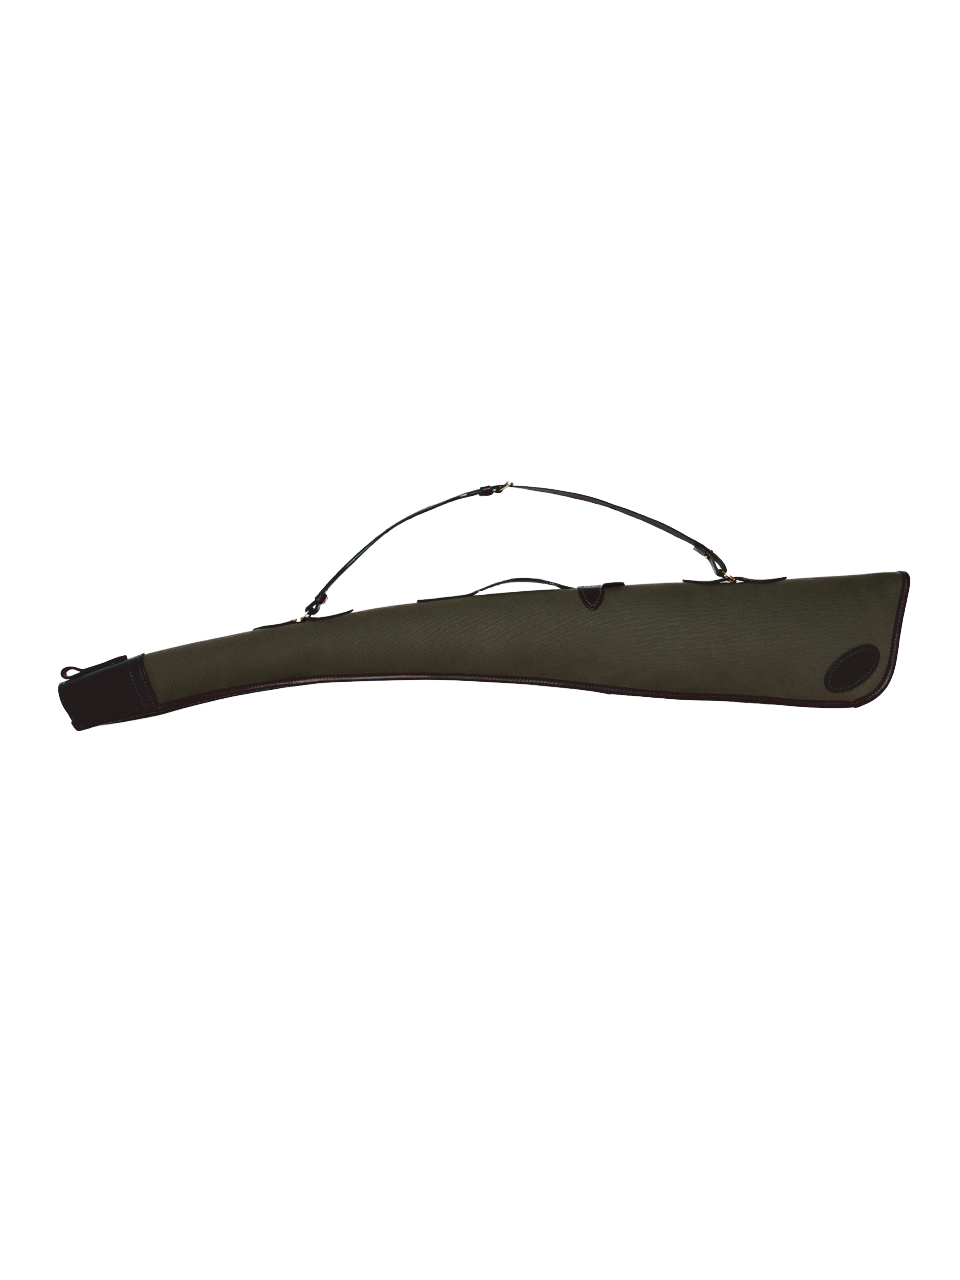 Canvas and Leather Single Gun Slip, Green